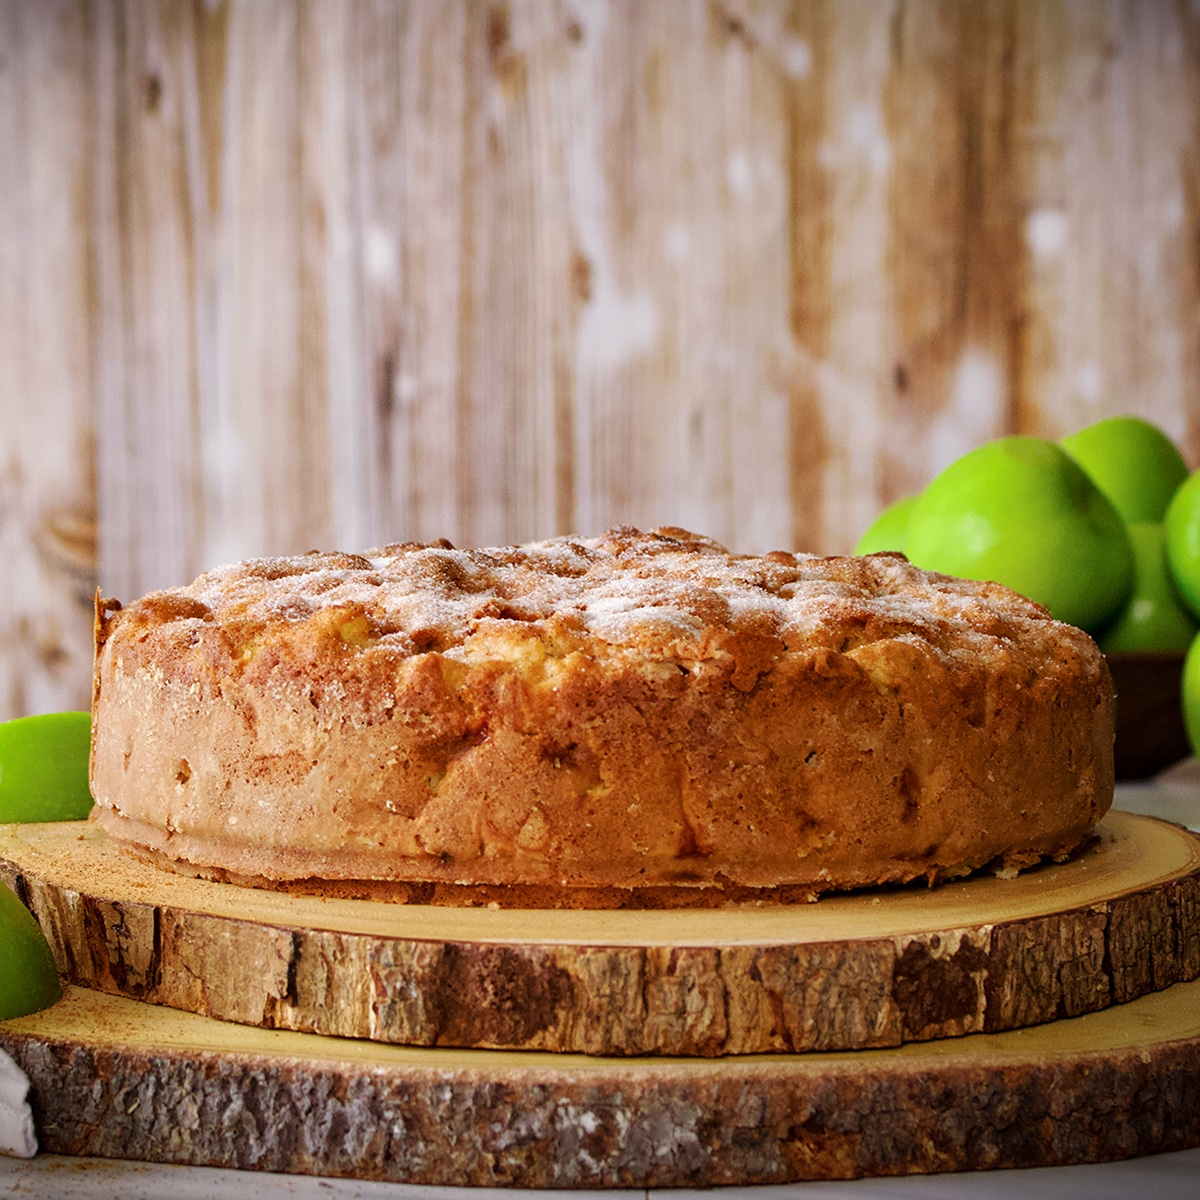 An Irish Apple Cake with a sugar crusted top on two wood cake boards surrounded by green apples.